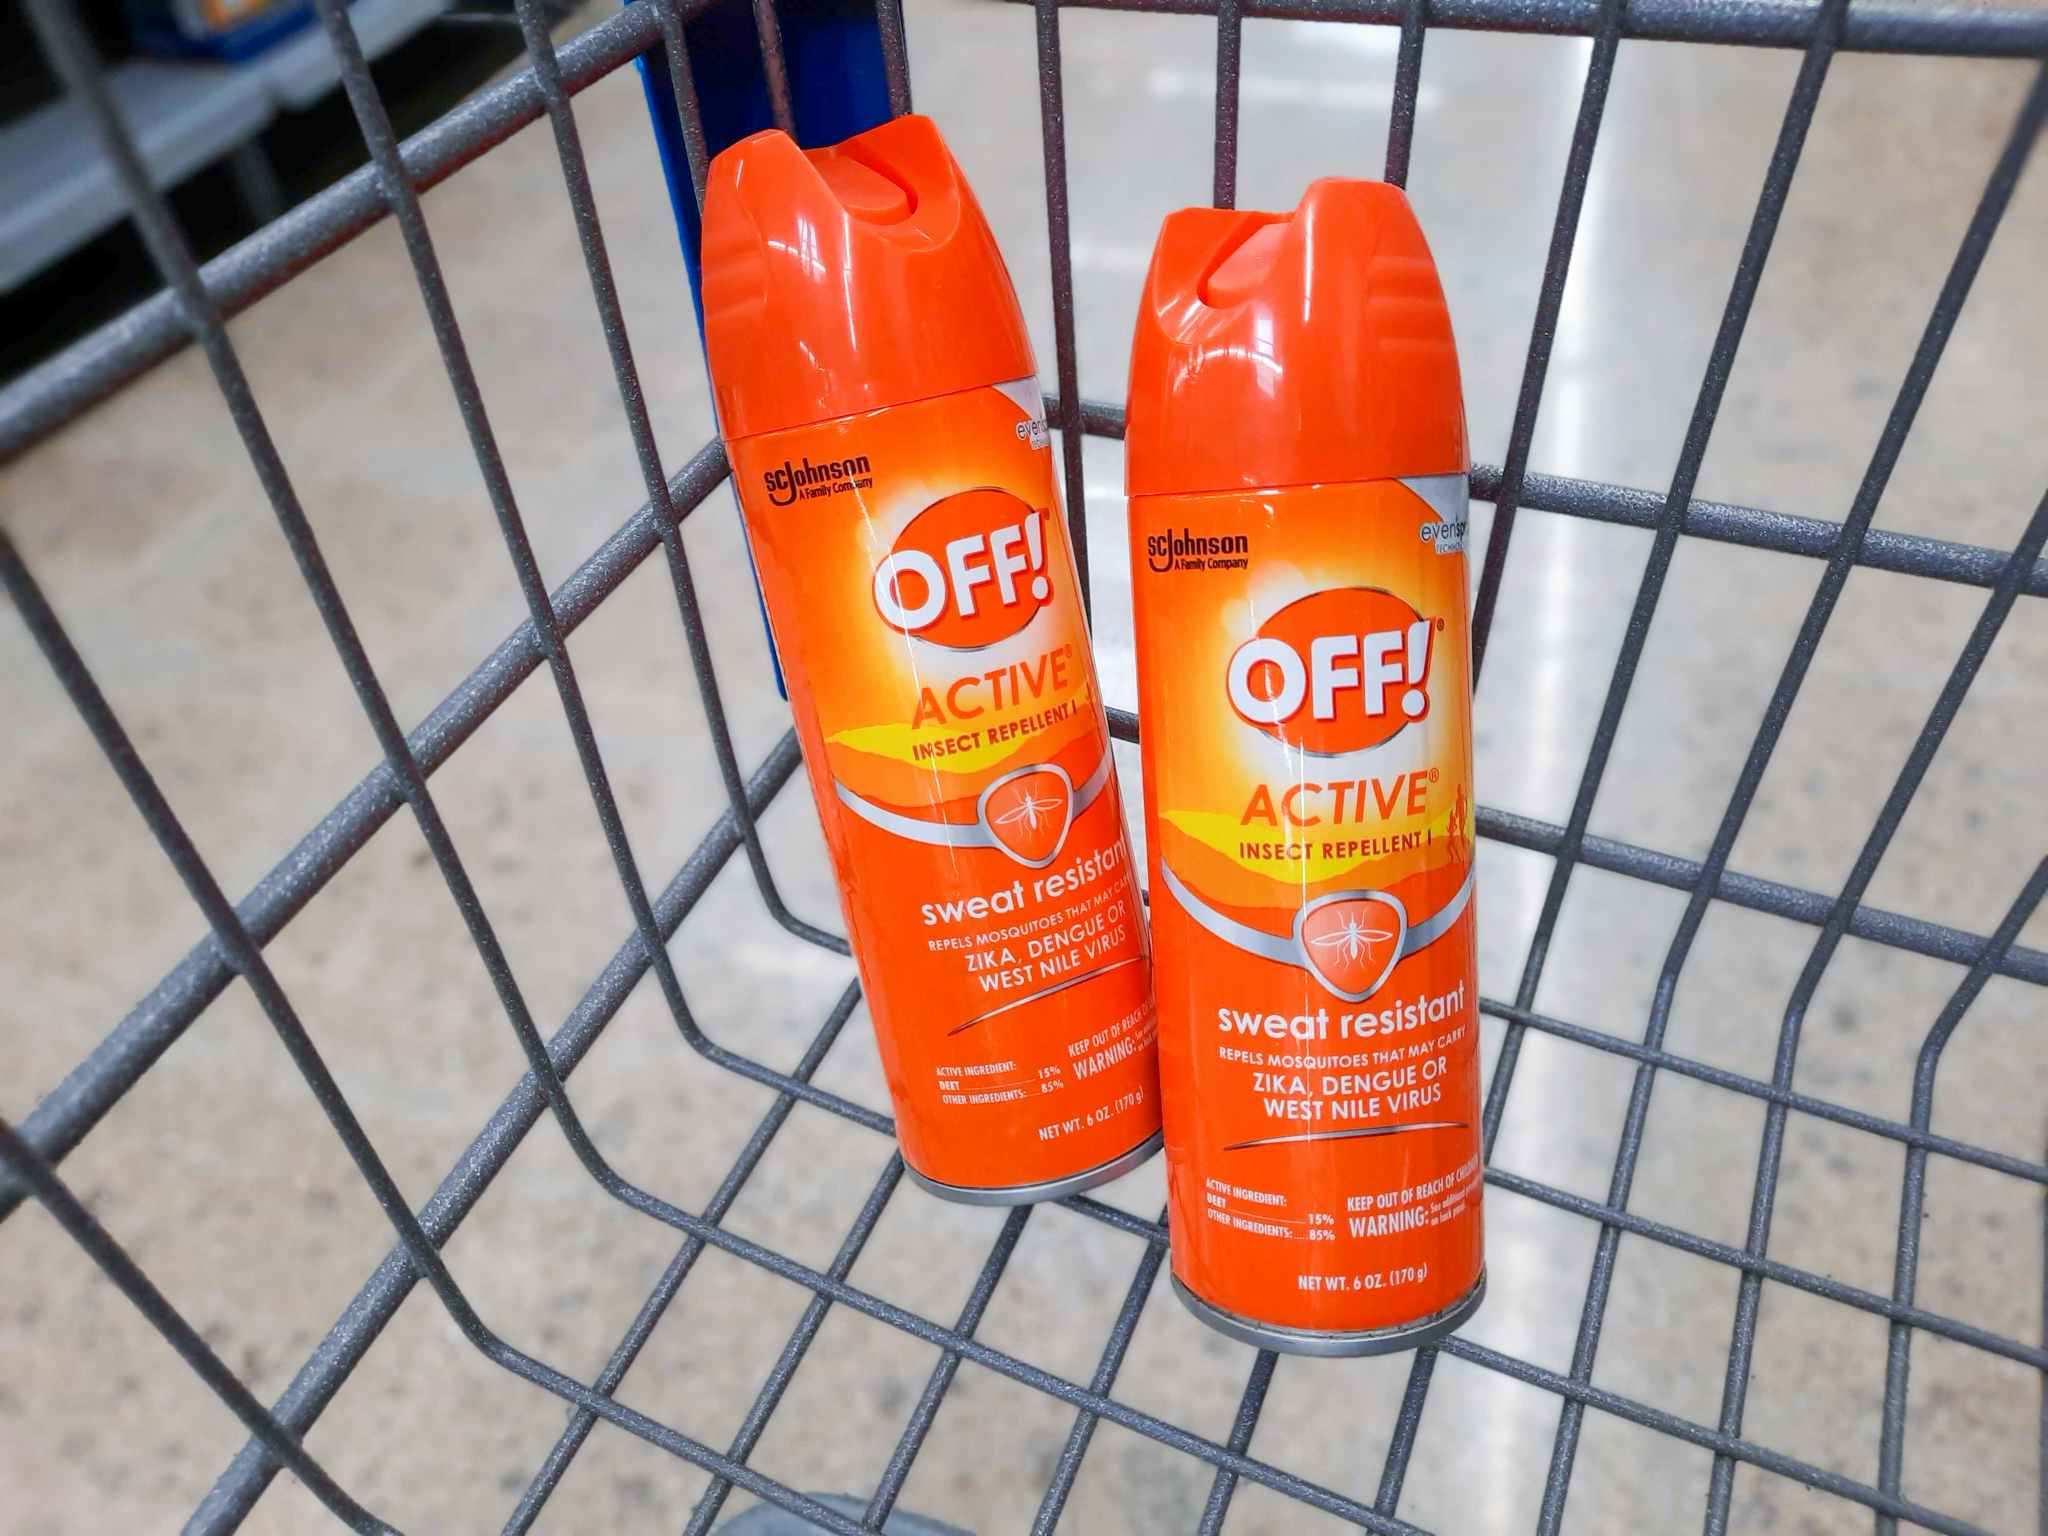 Off! Active Insect Repellent in Walmart shopping cart